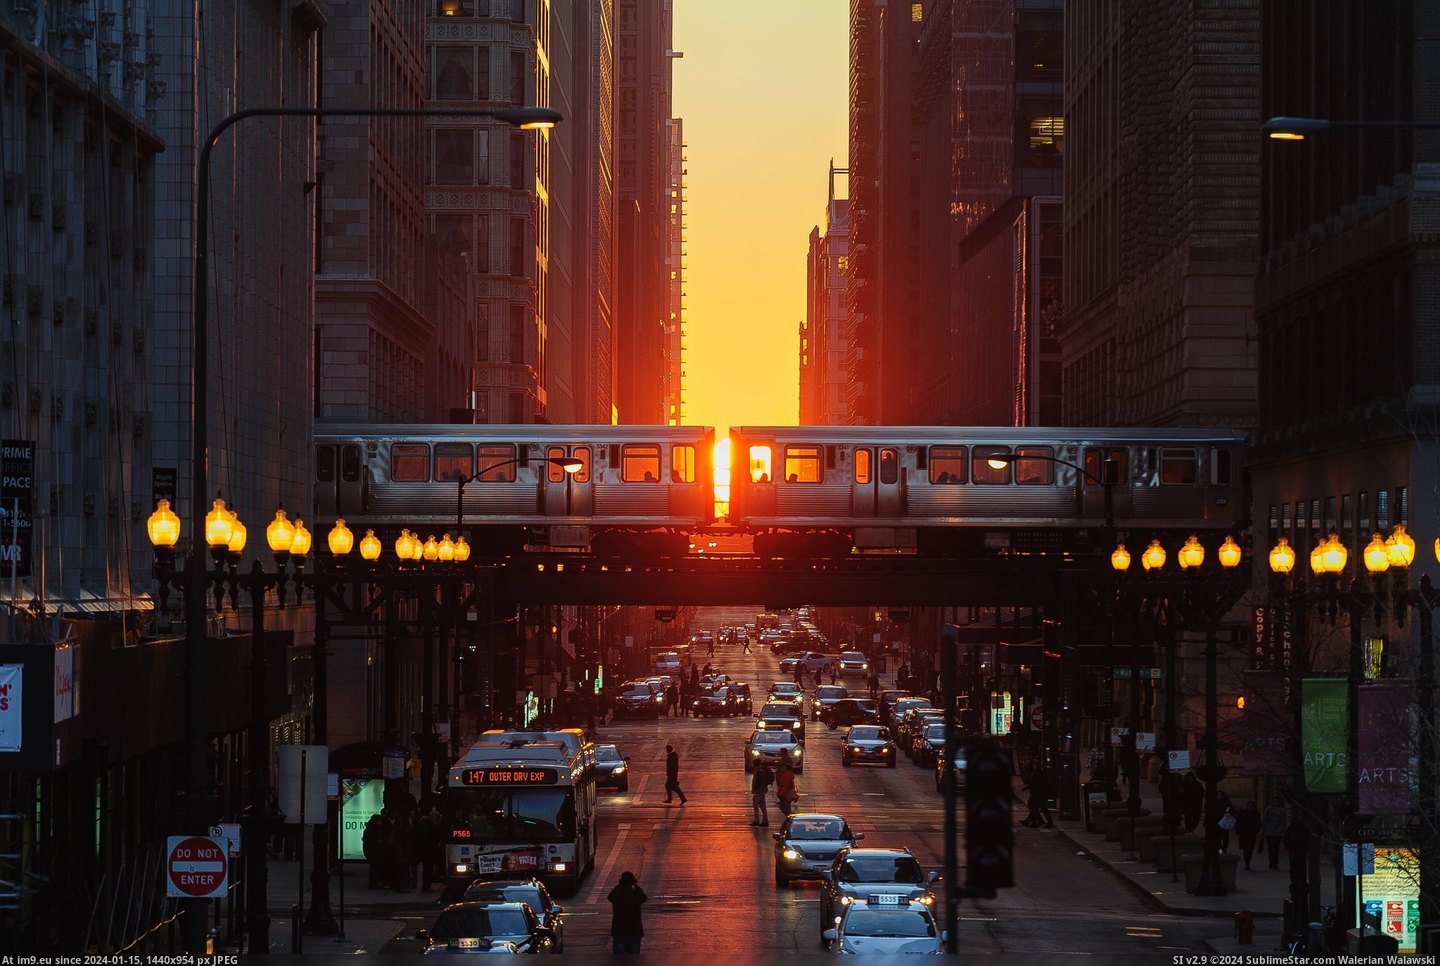 #Wallpaper #Wide #Wallpapers #Sun #Streets #Setting #Equinox #Visible #Architecture #Spring #Highres #Chicago [Pics] The setting sun is visible down the streets of Chicago during the spring equinox Pic. (Image of album My r/PICS favs))